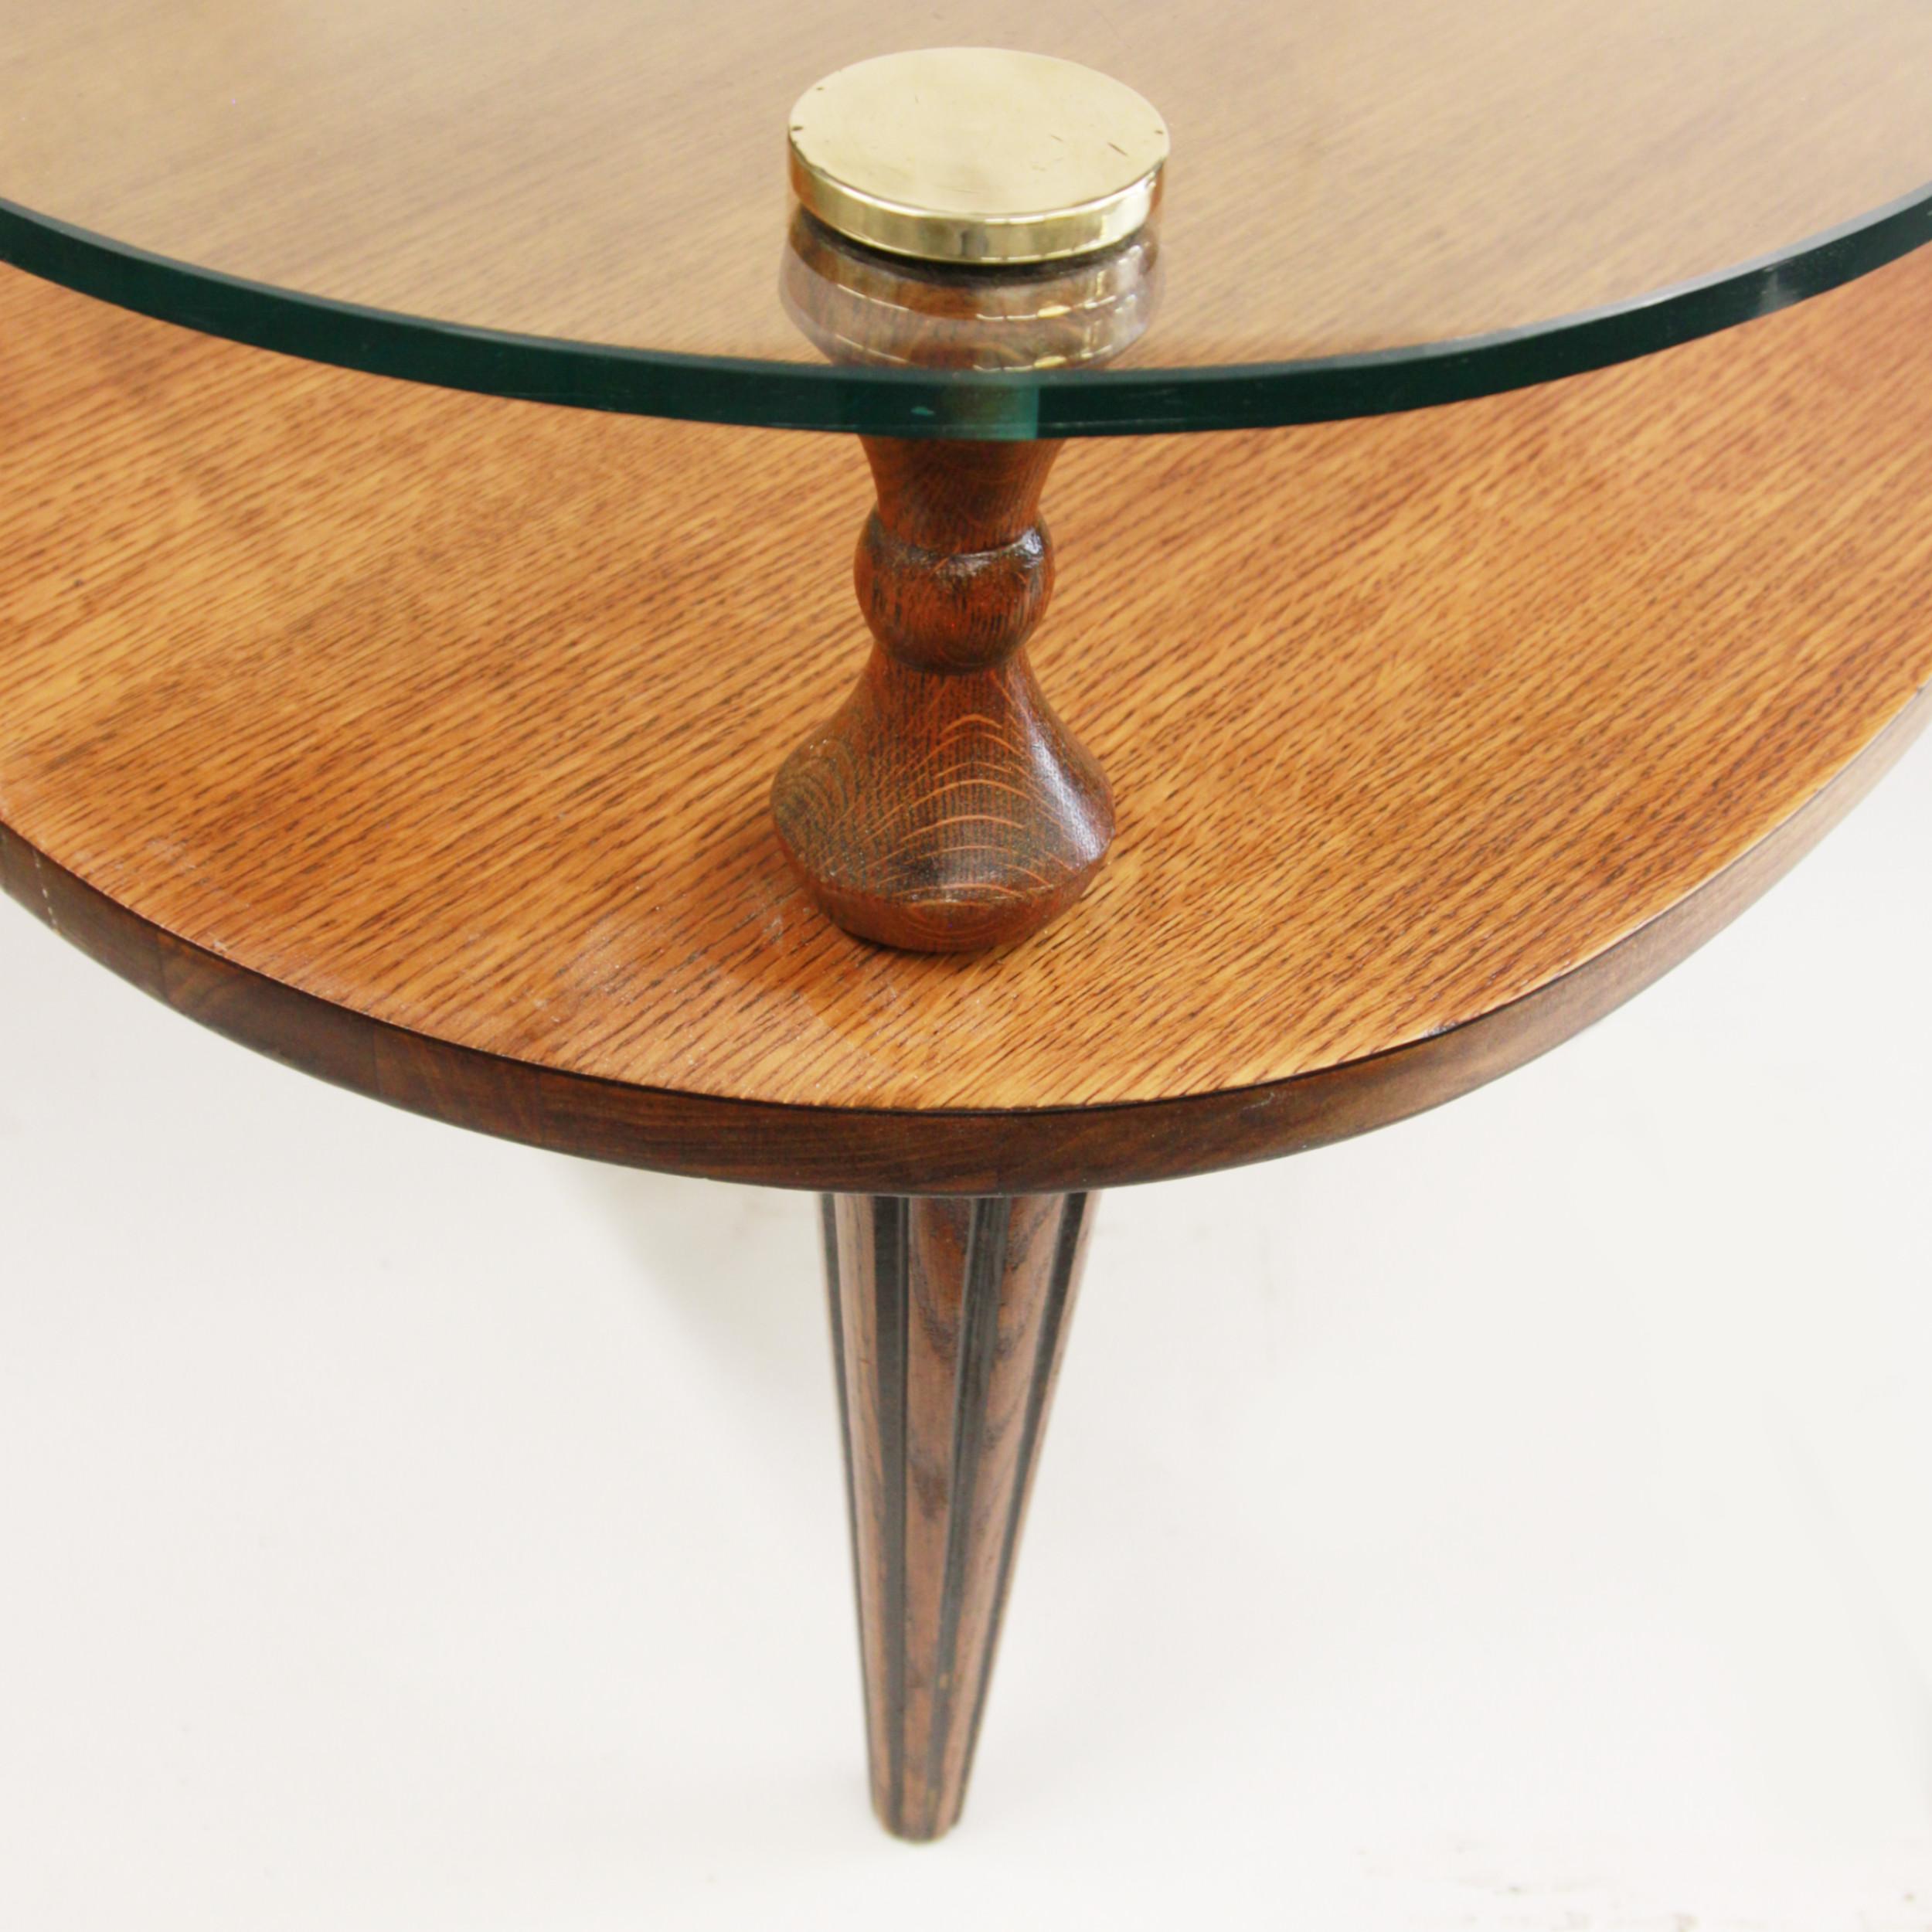 American Atomic Mid Century Modern Biomorphic Kidney Shaped Glass & Oak Coffee Table For Sale